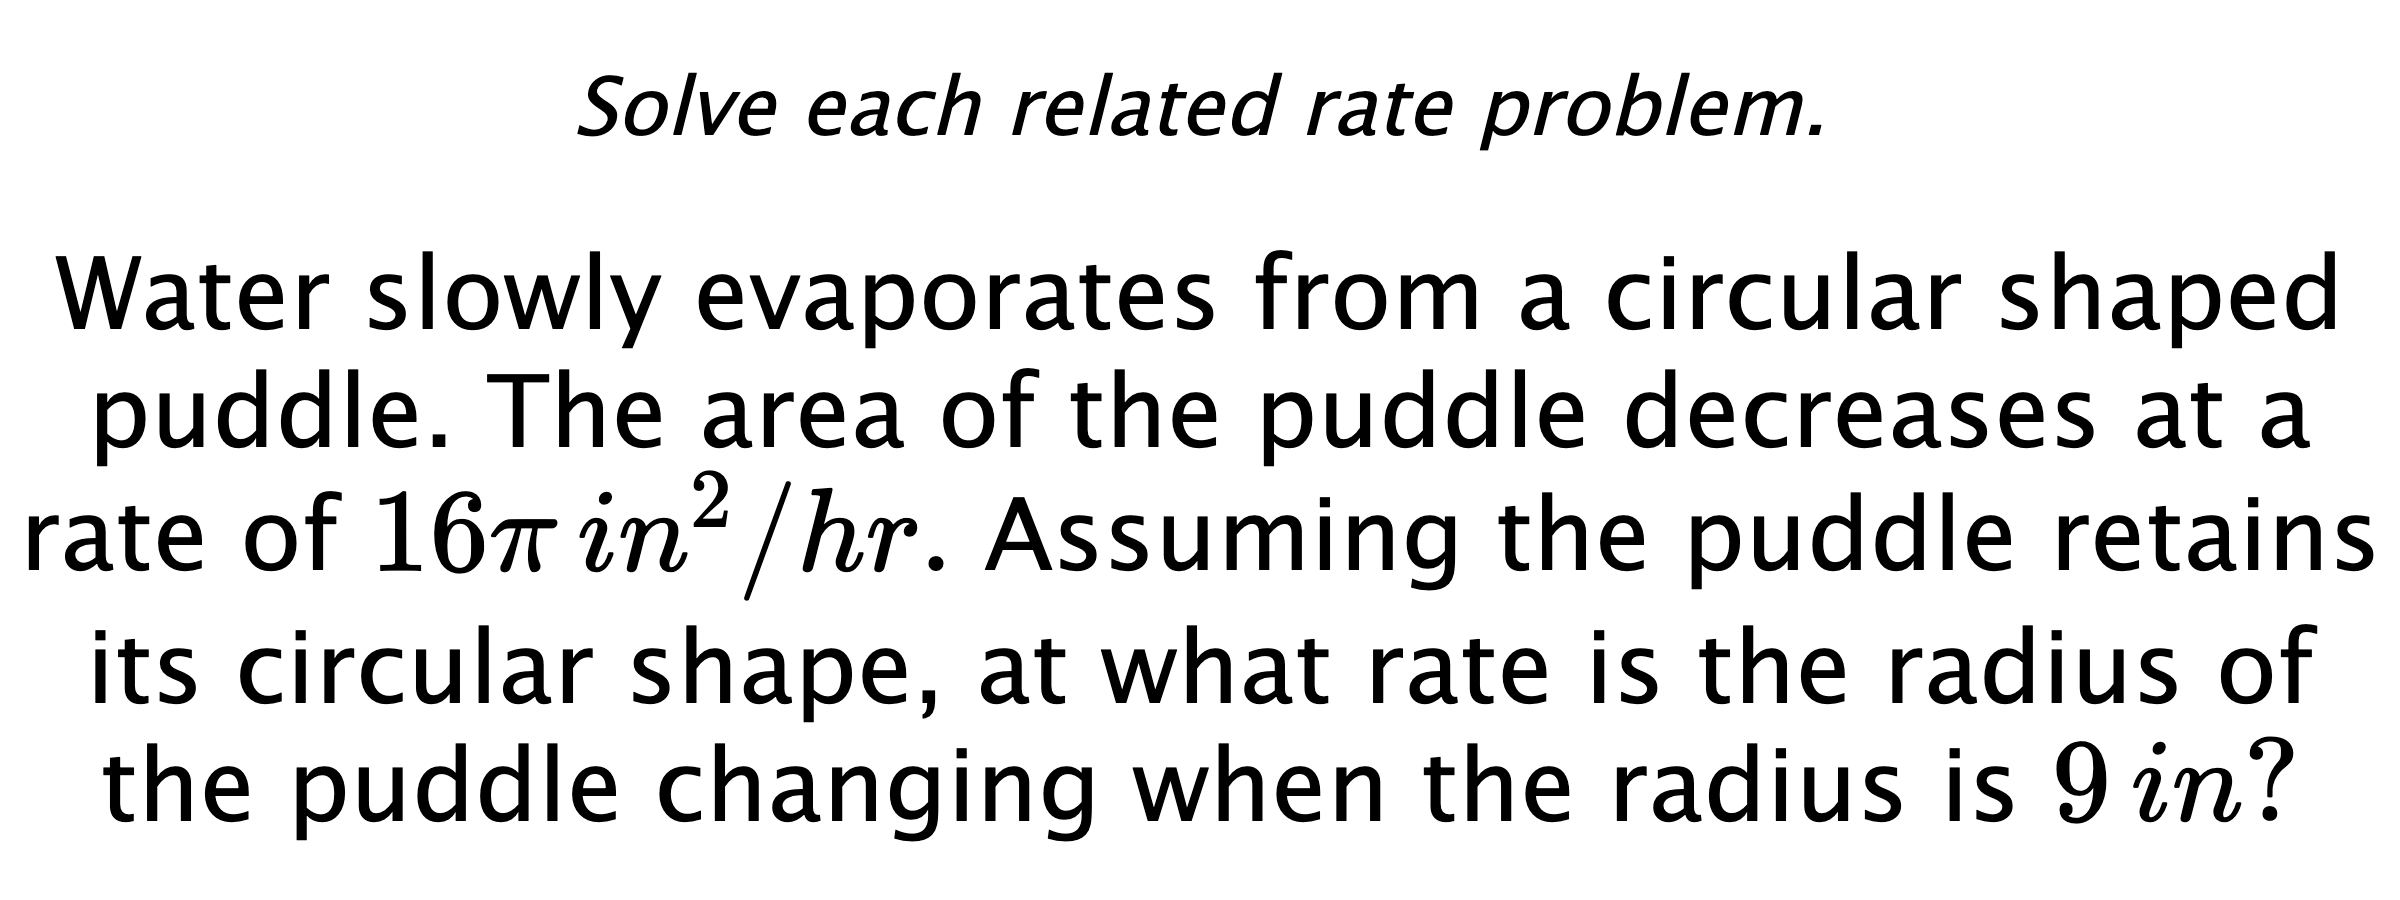 Solve each related rate problem. Water slowly evaporates from a circular shaped puddle. The area of the puddle decreases at a rate of $16\pi\,in^{2}/hr.$  Assuming the puddle retains its circular shape, at what rate is the radius of the puddle changing when the radius is $9\,in?$